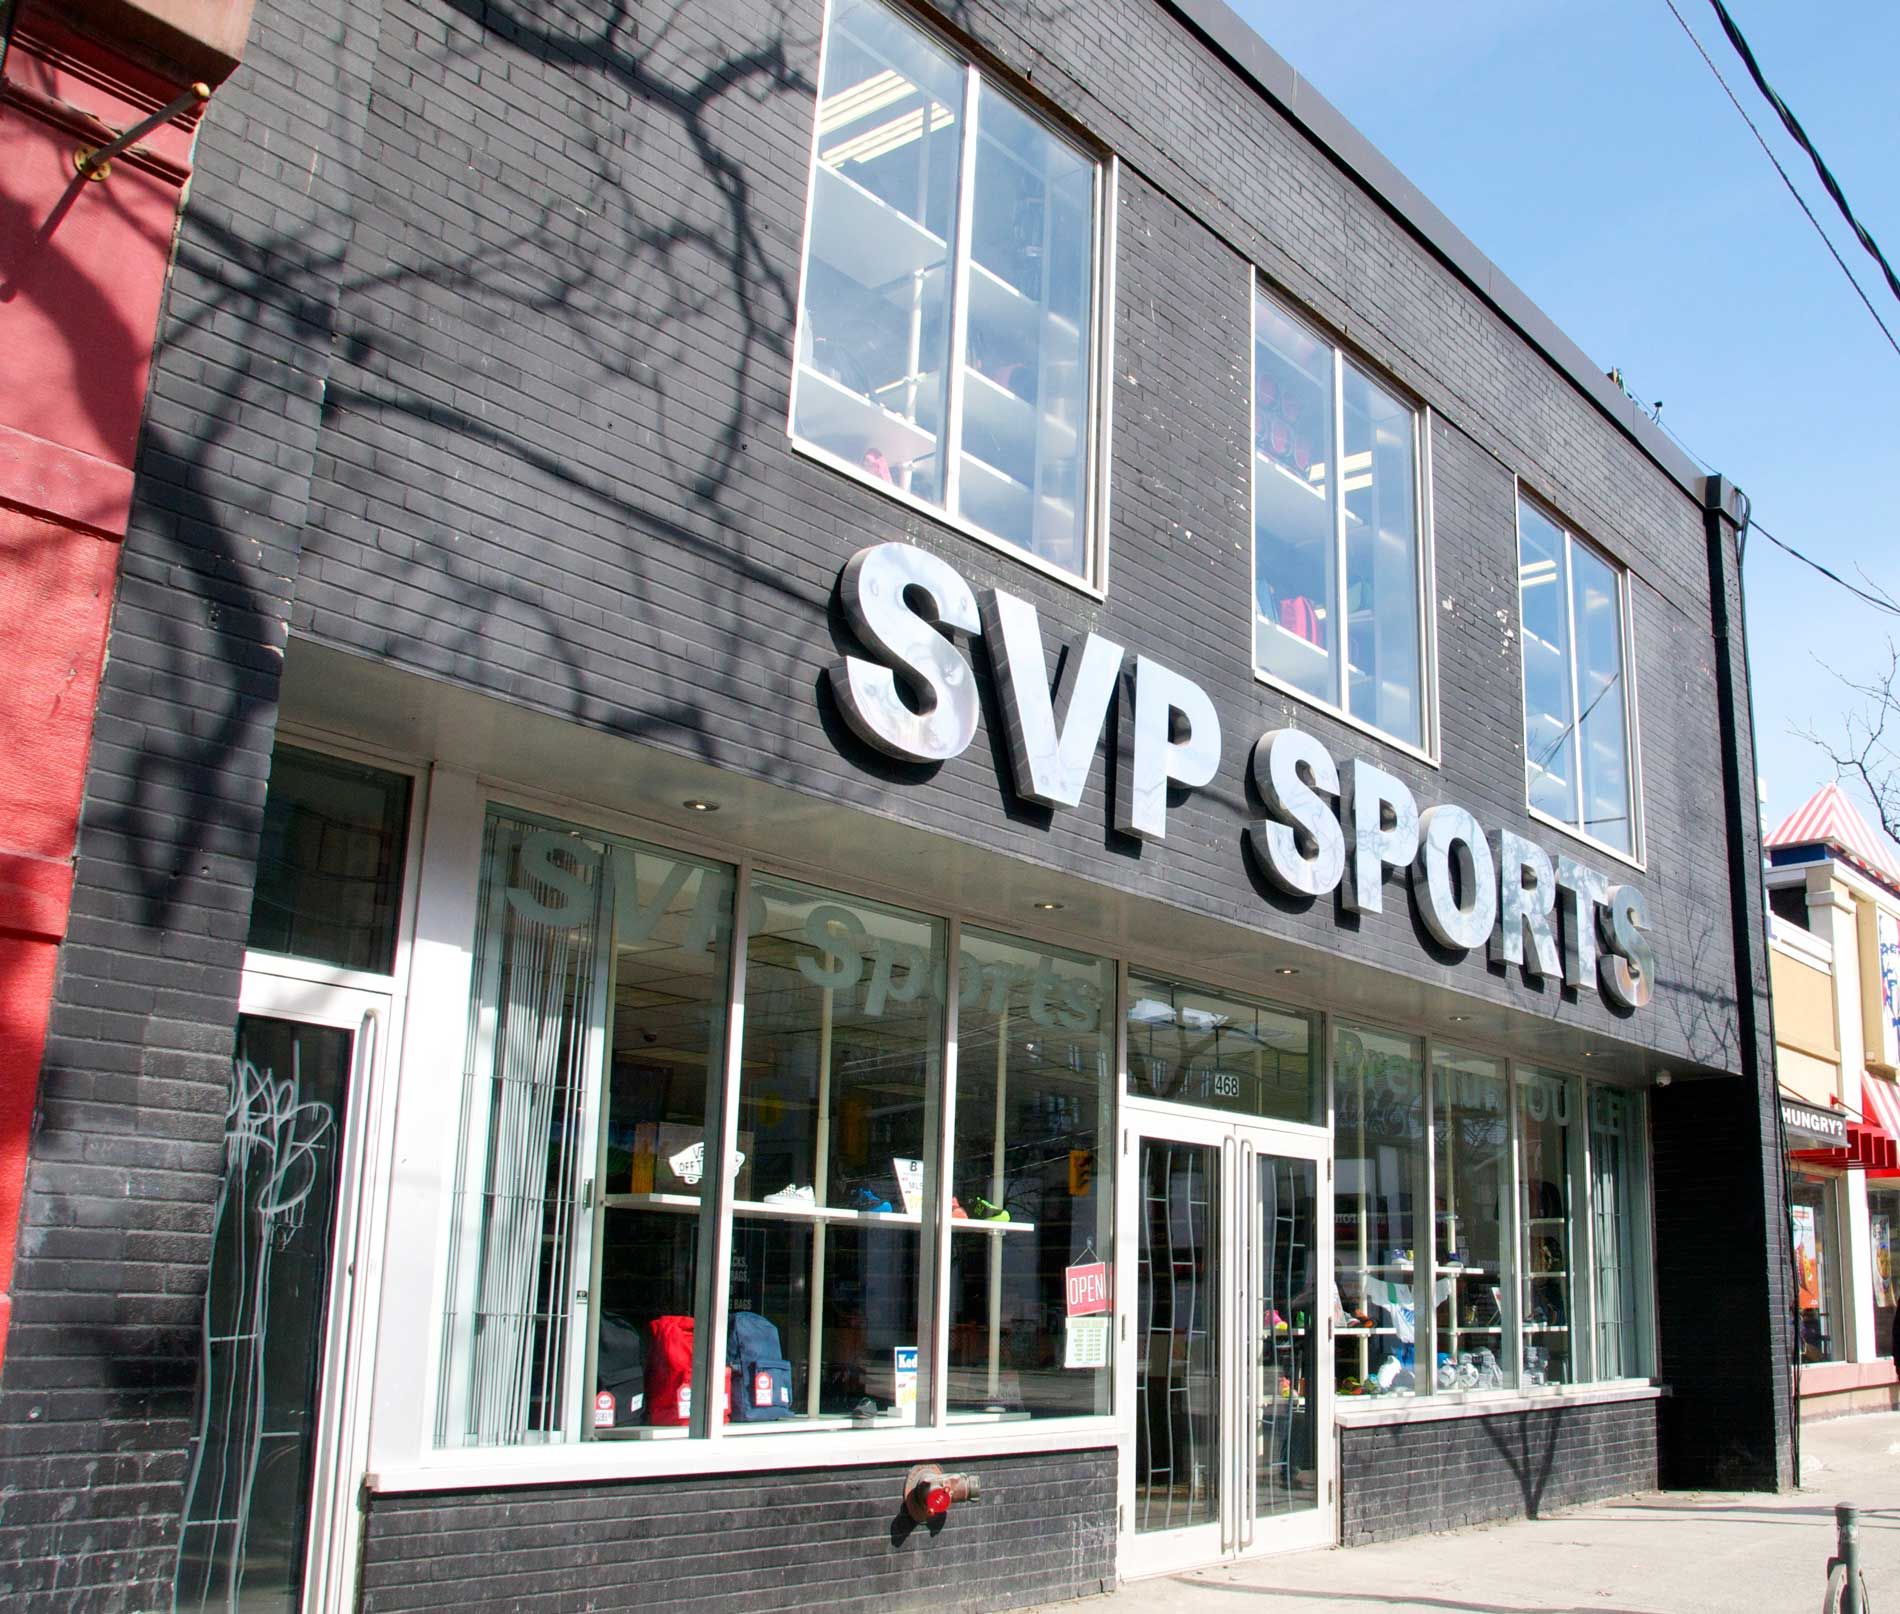 Toronto's now closed SVP Sports store transforming into live music space